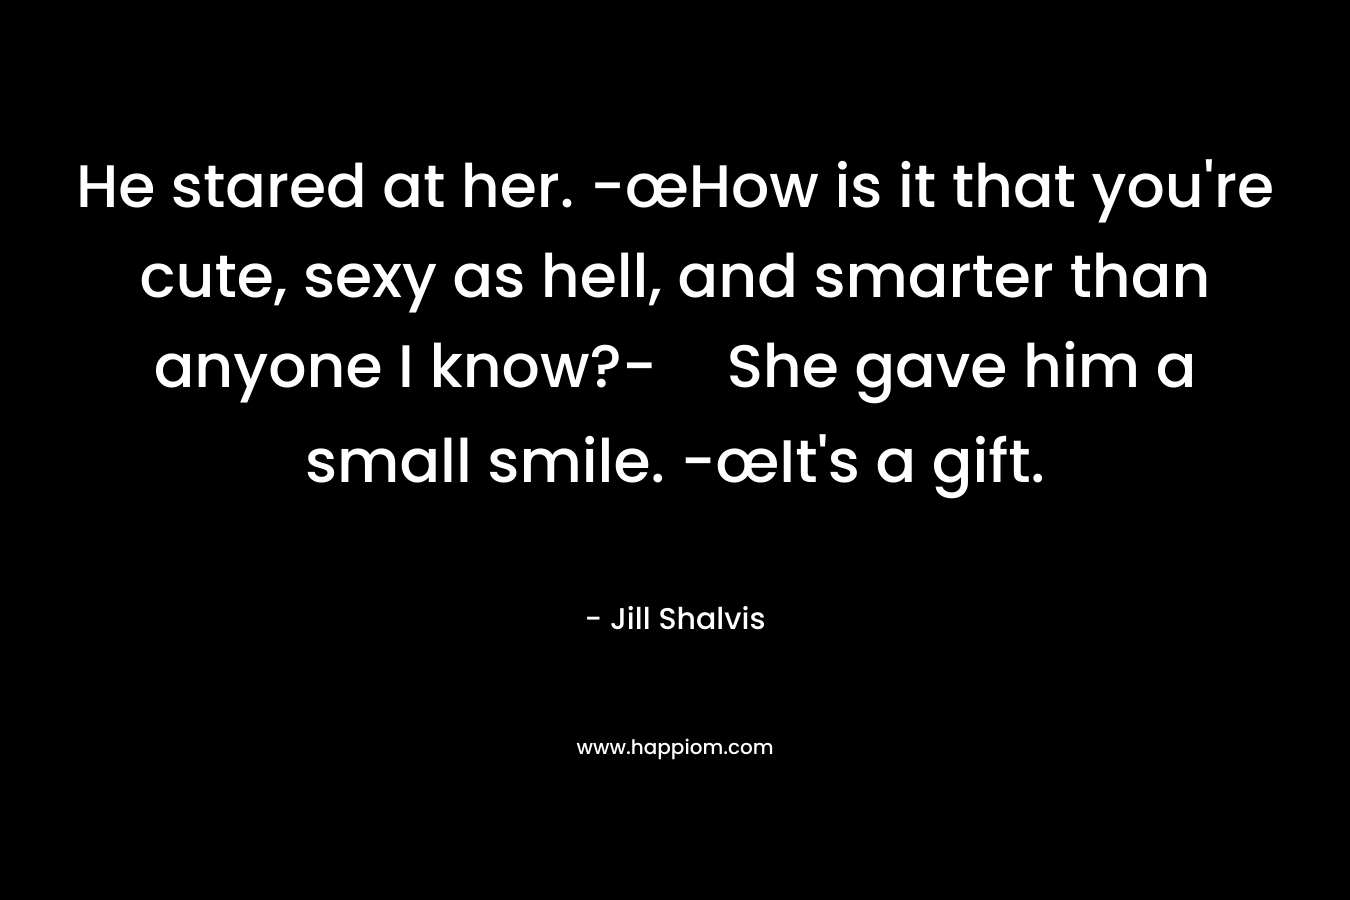 He stared at her. -œHow is it that you’re cute, sexy as hell, and smarter than anyone I know?-She gave him a small smile. -œIt’s a gift. – Jill Shalvis